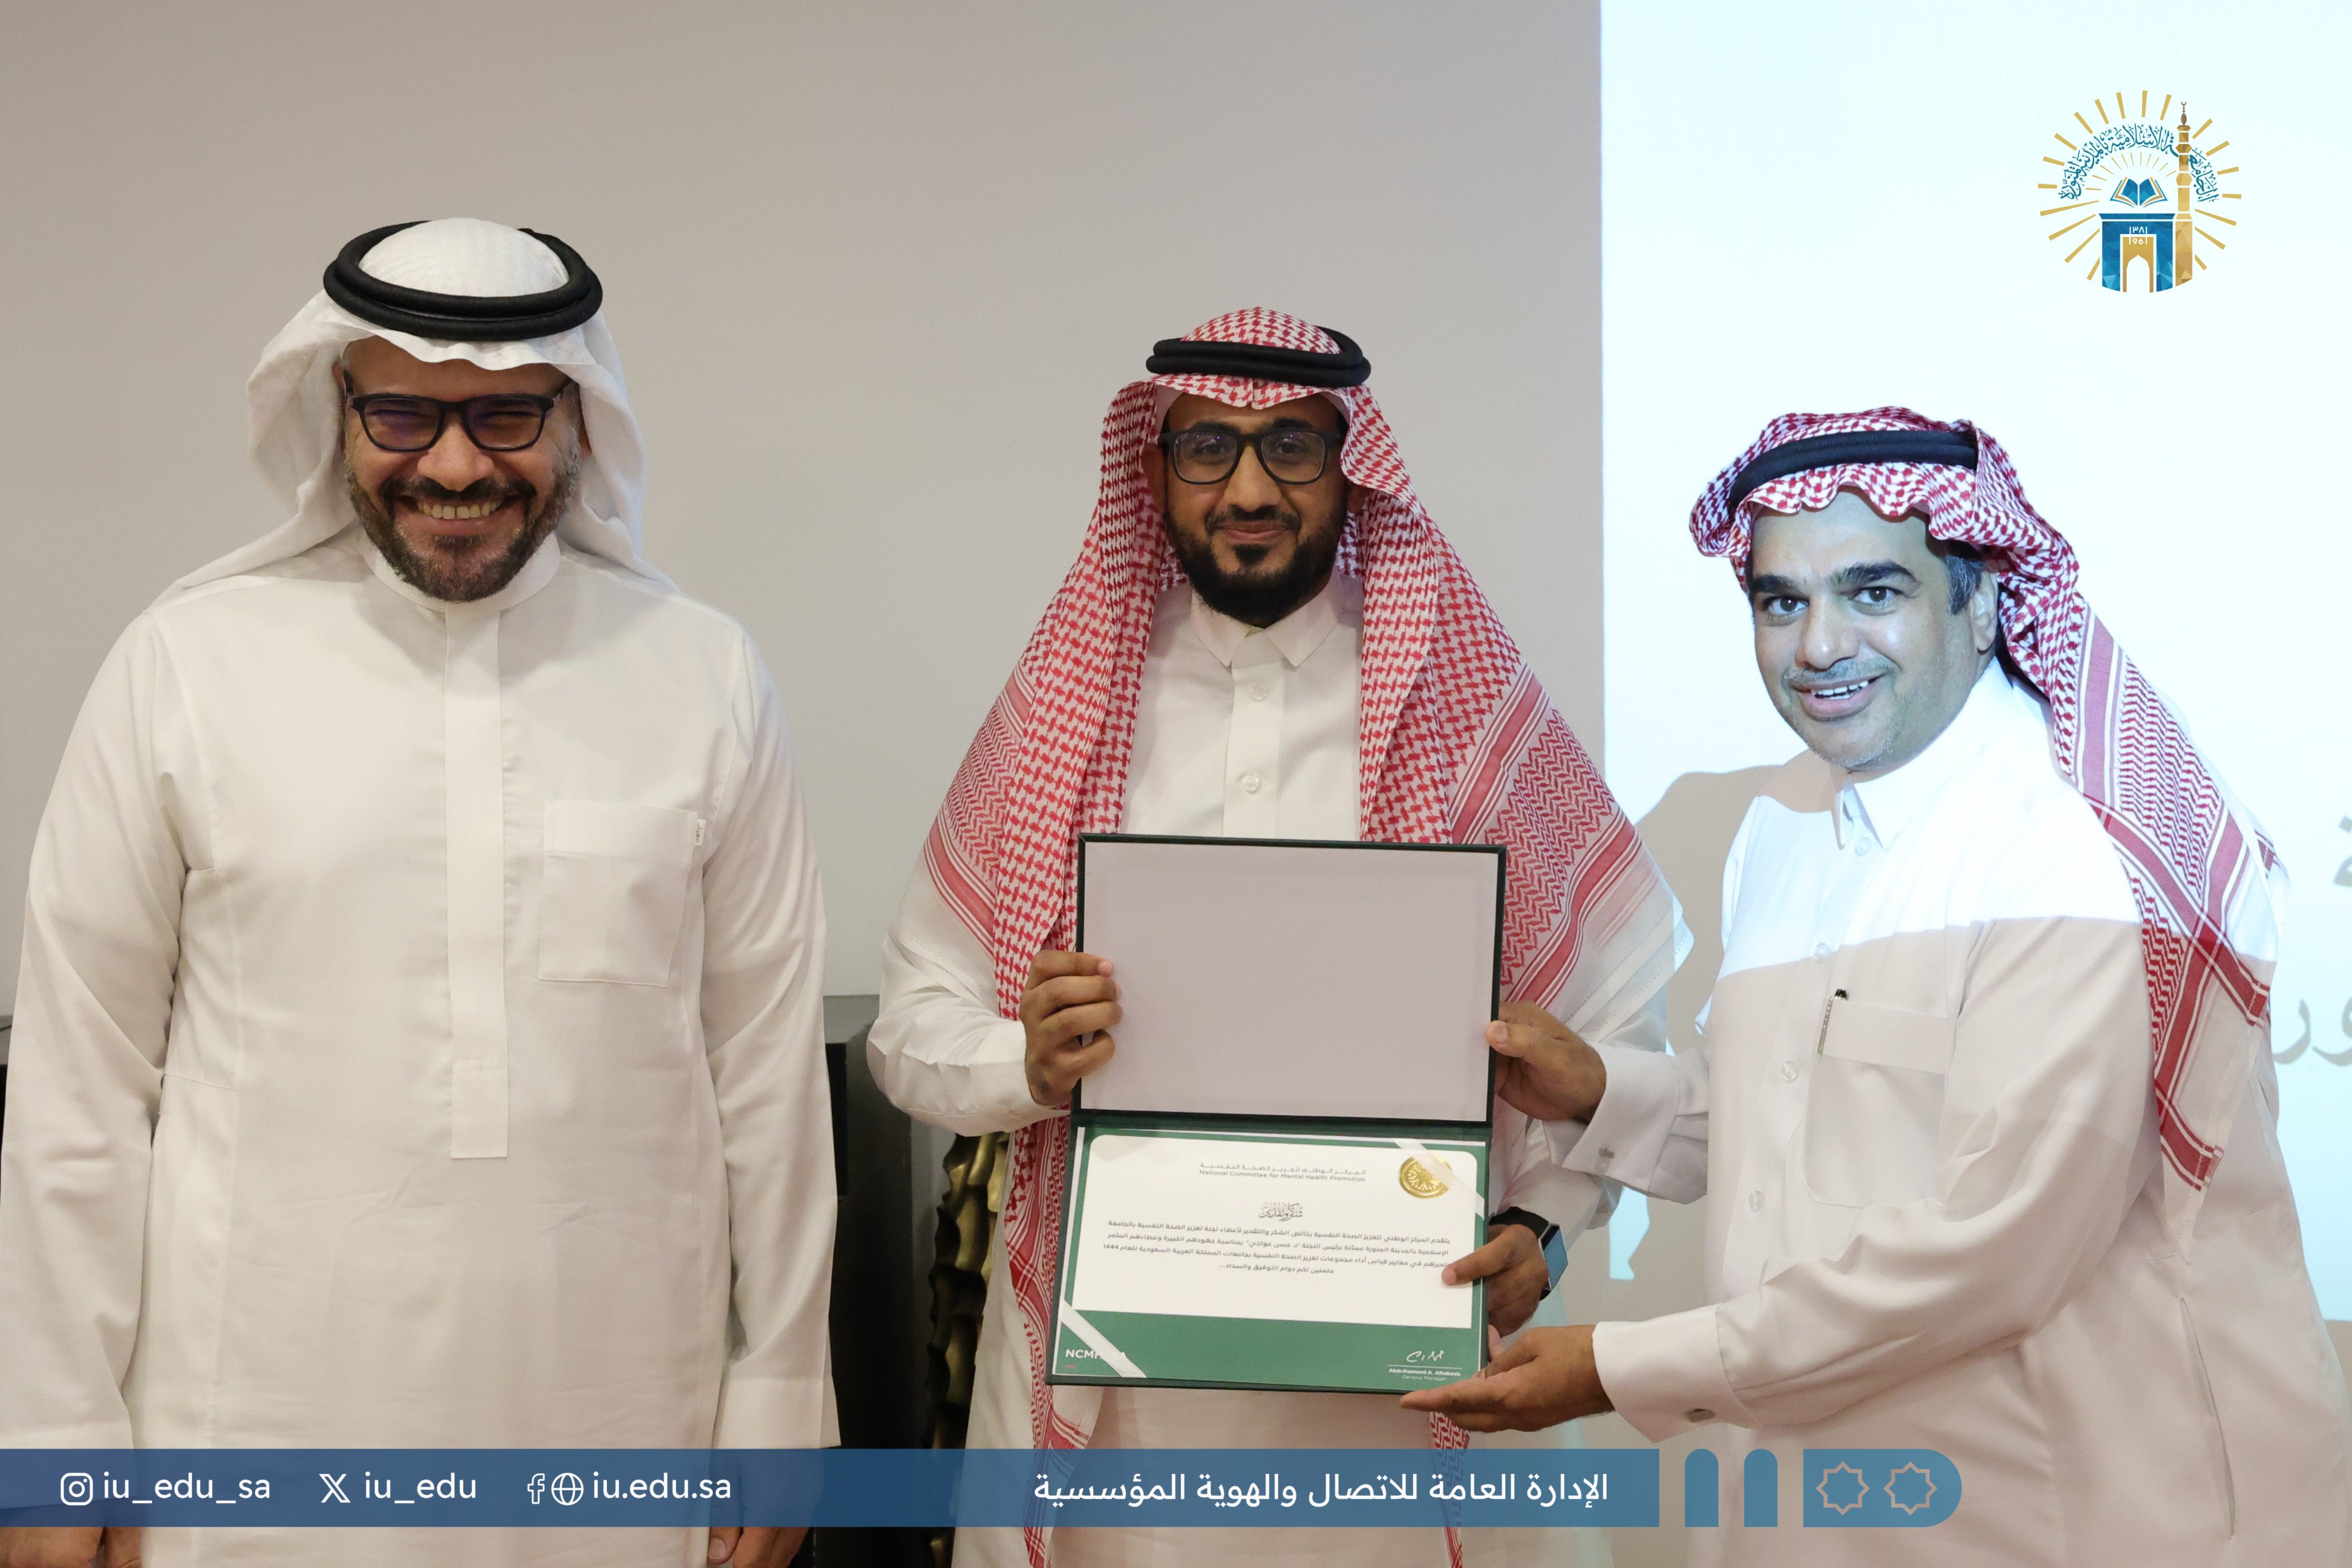 Islamic University achieves second place in promoting mental health